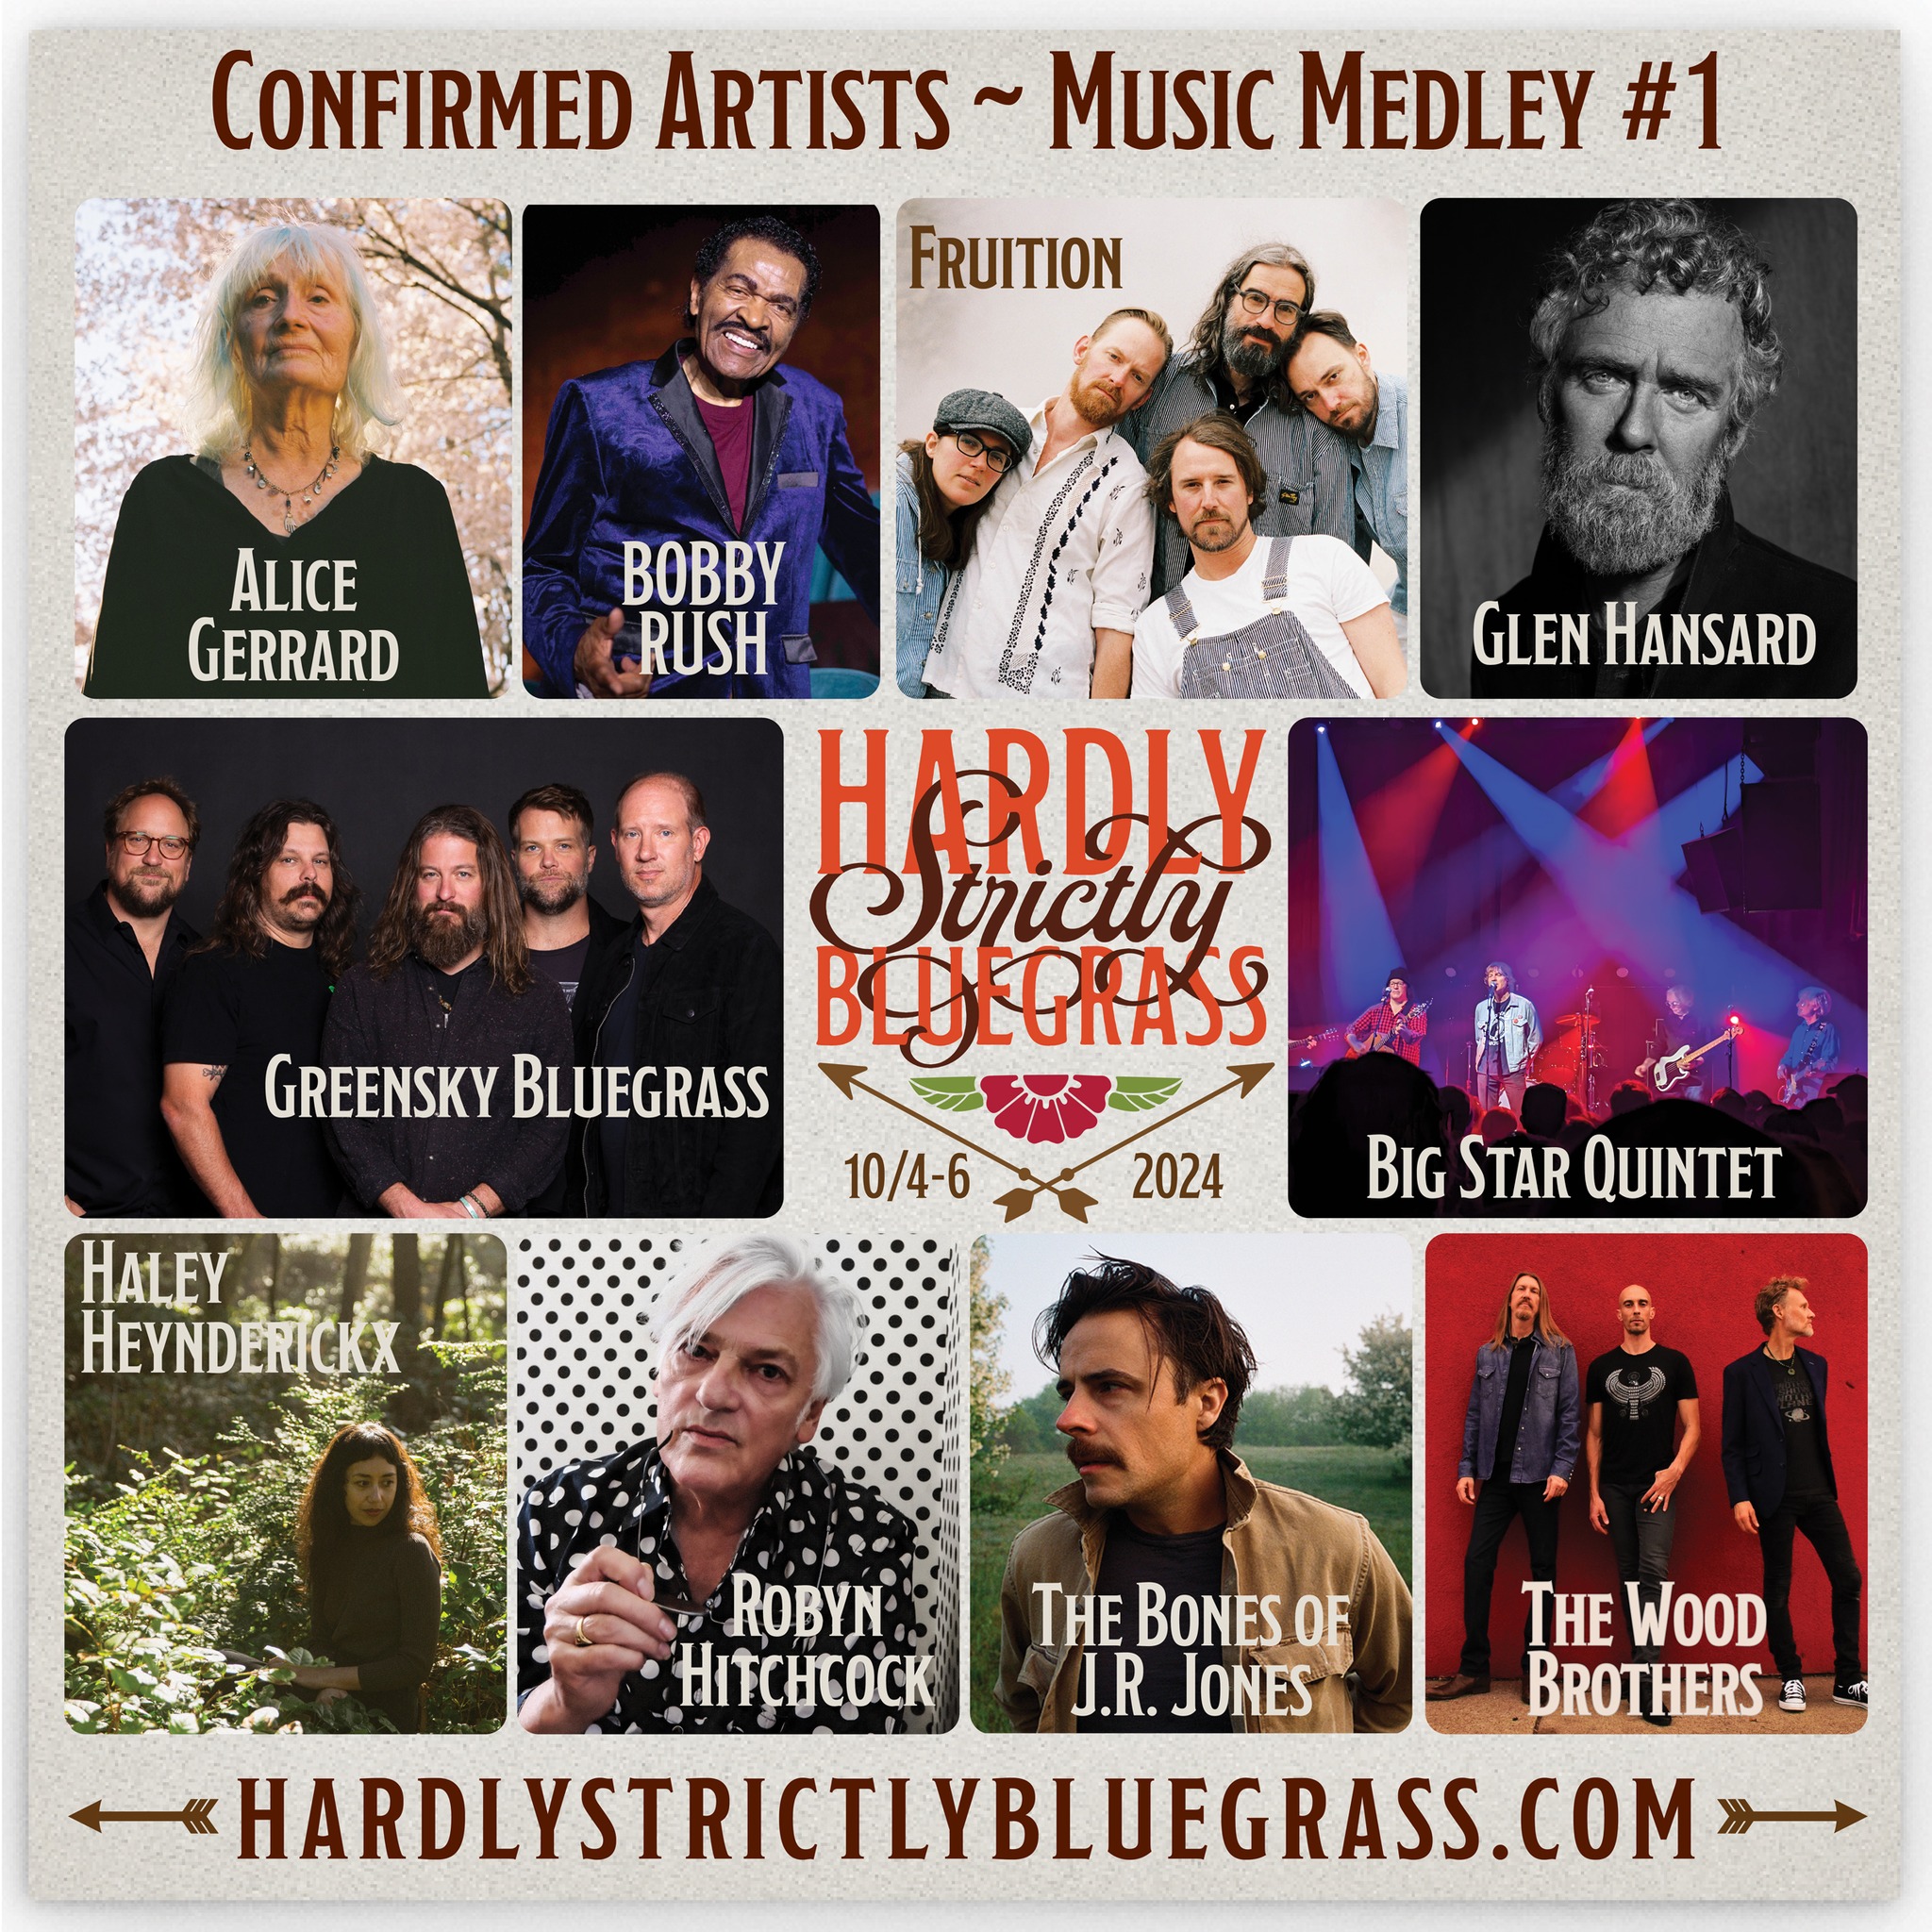 Hardly Strictly Bluegrass 2024 lineup poster